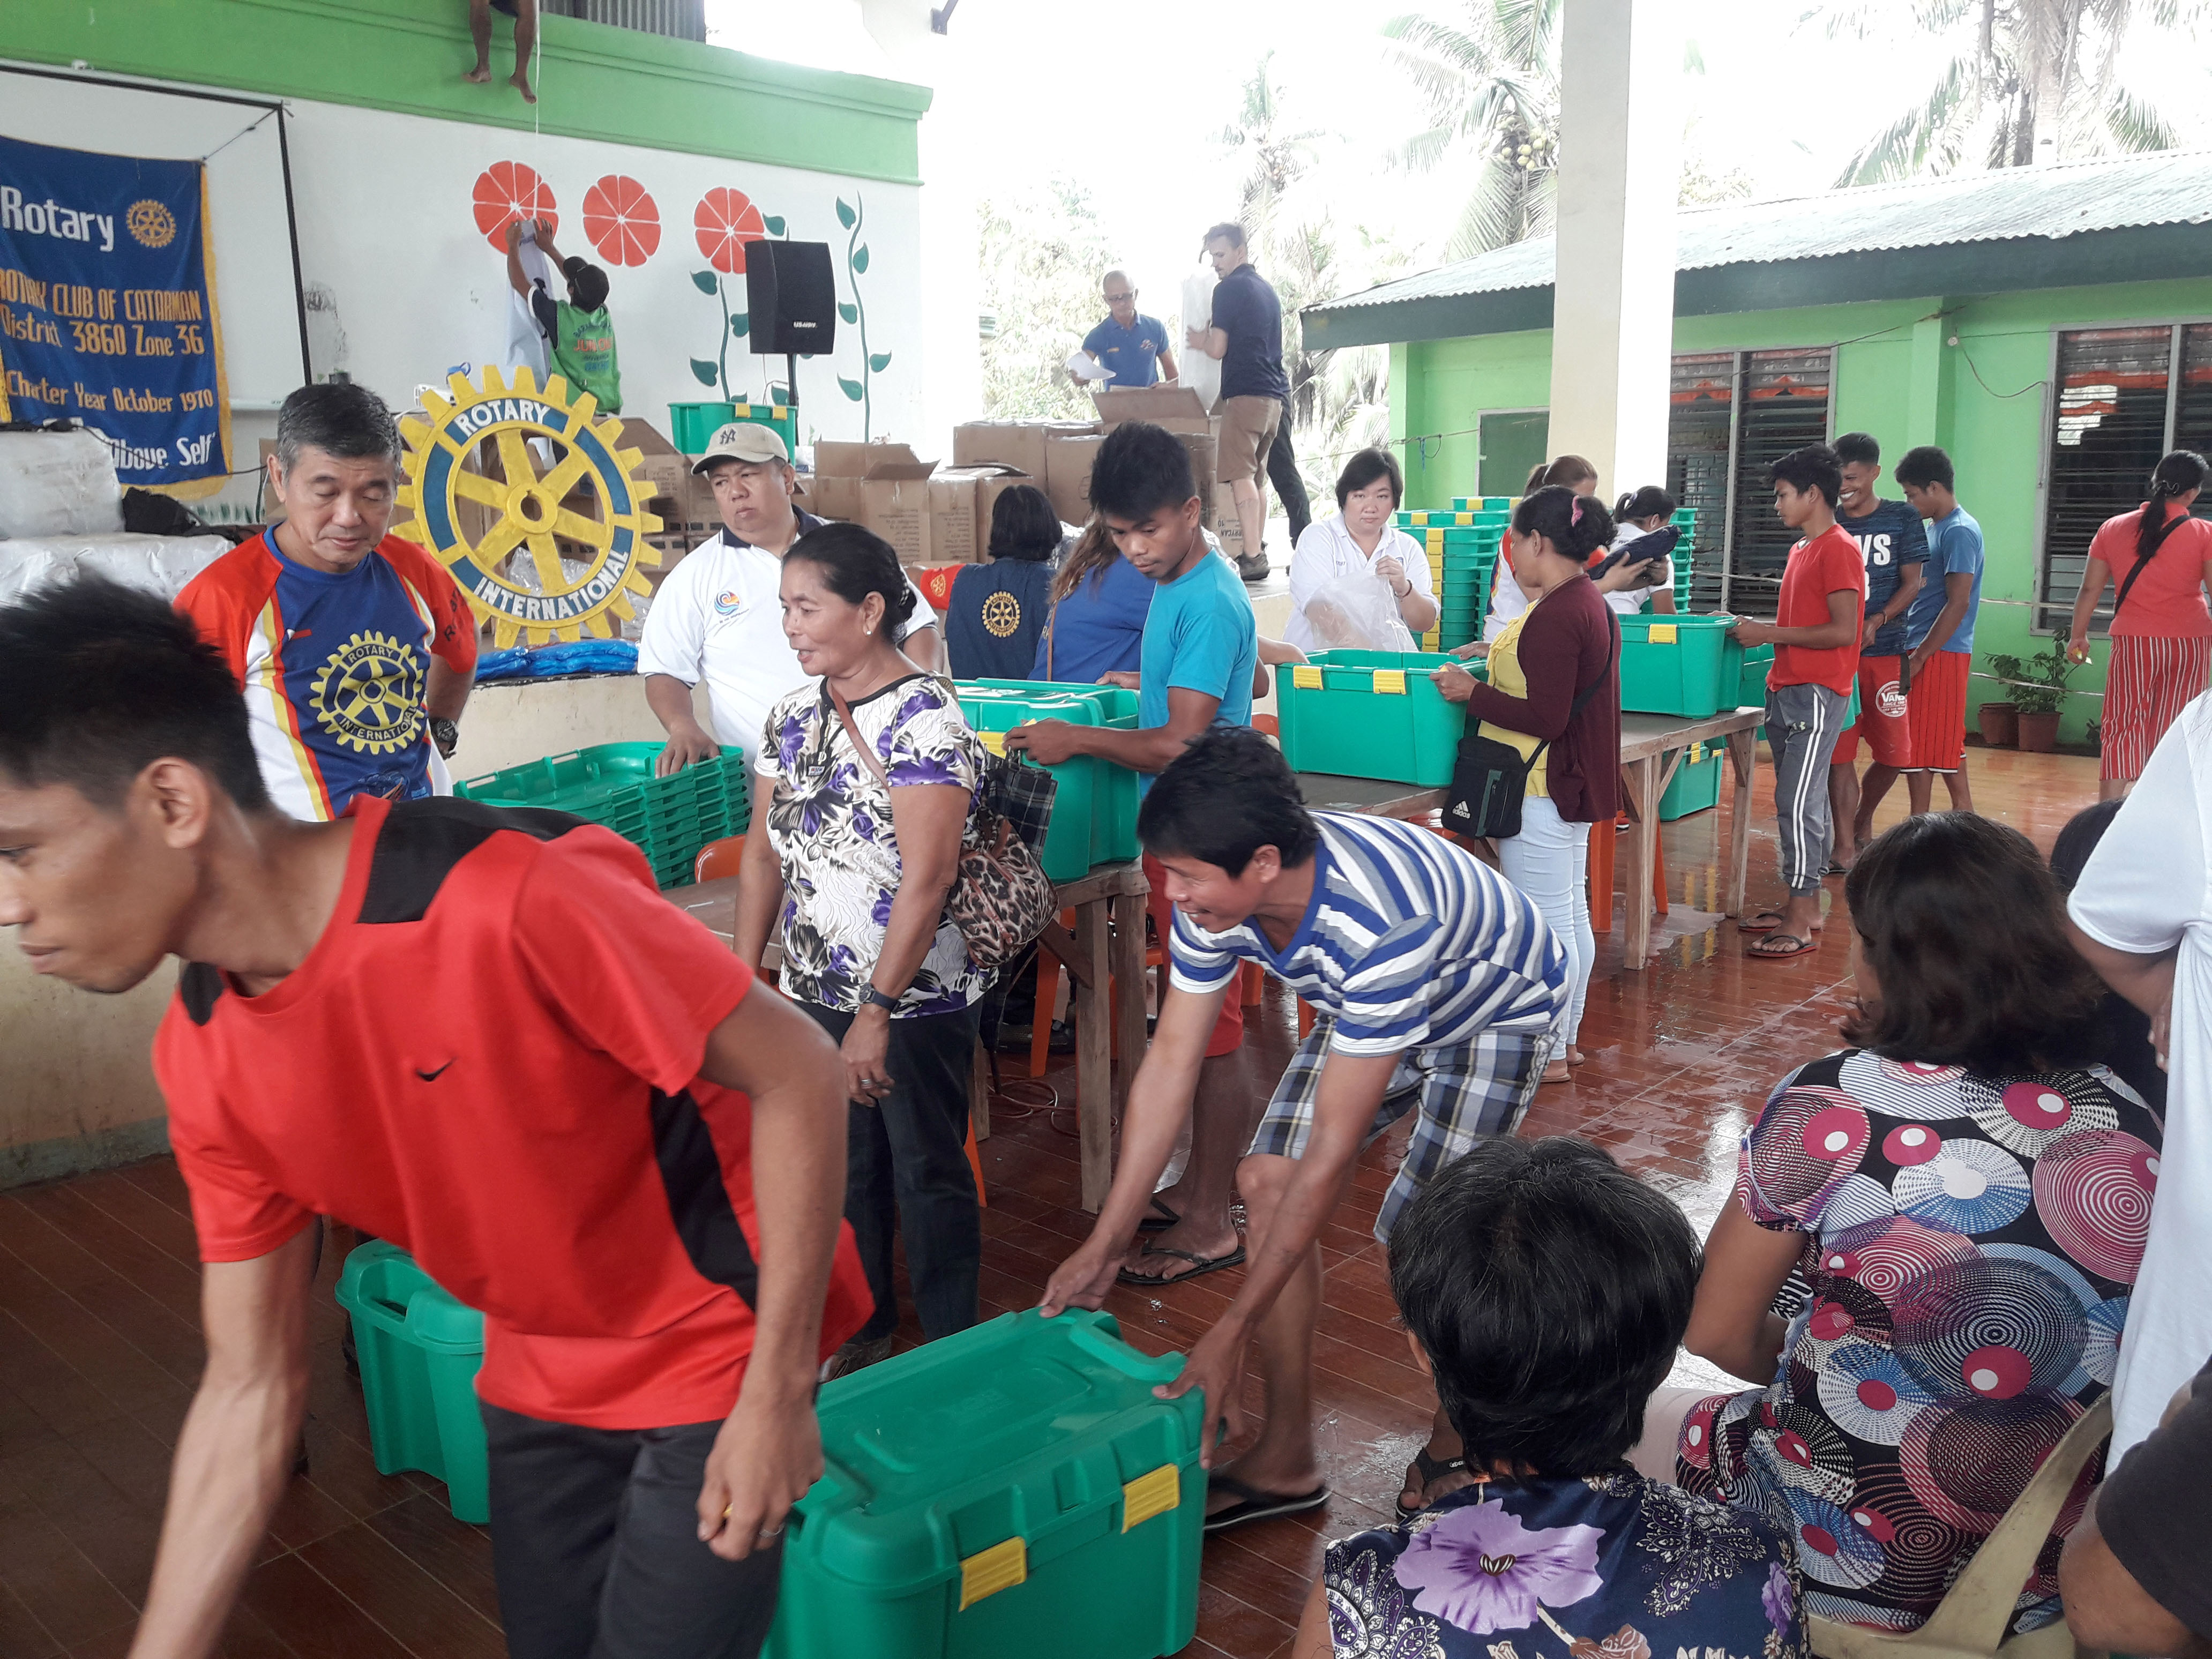 ShelterBox worked seamlessly with the local rotary chapter to distribute kits and aid items to everyone who comes to the facilities